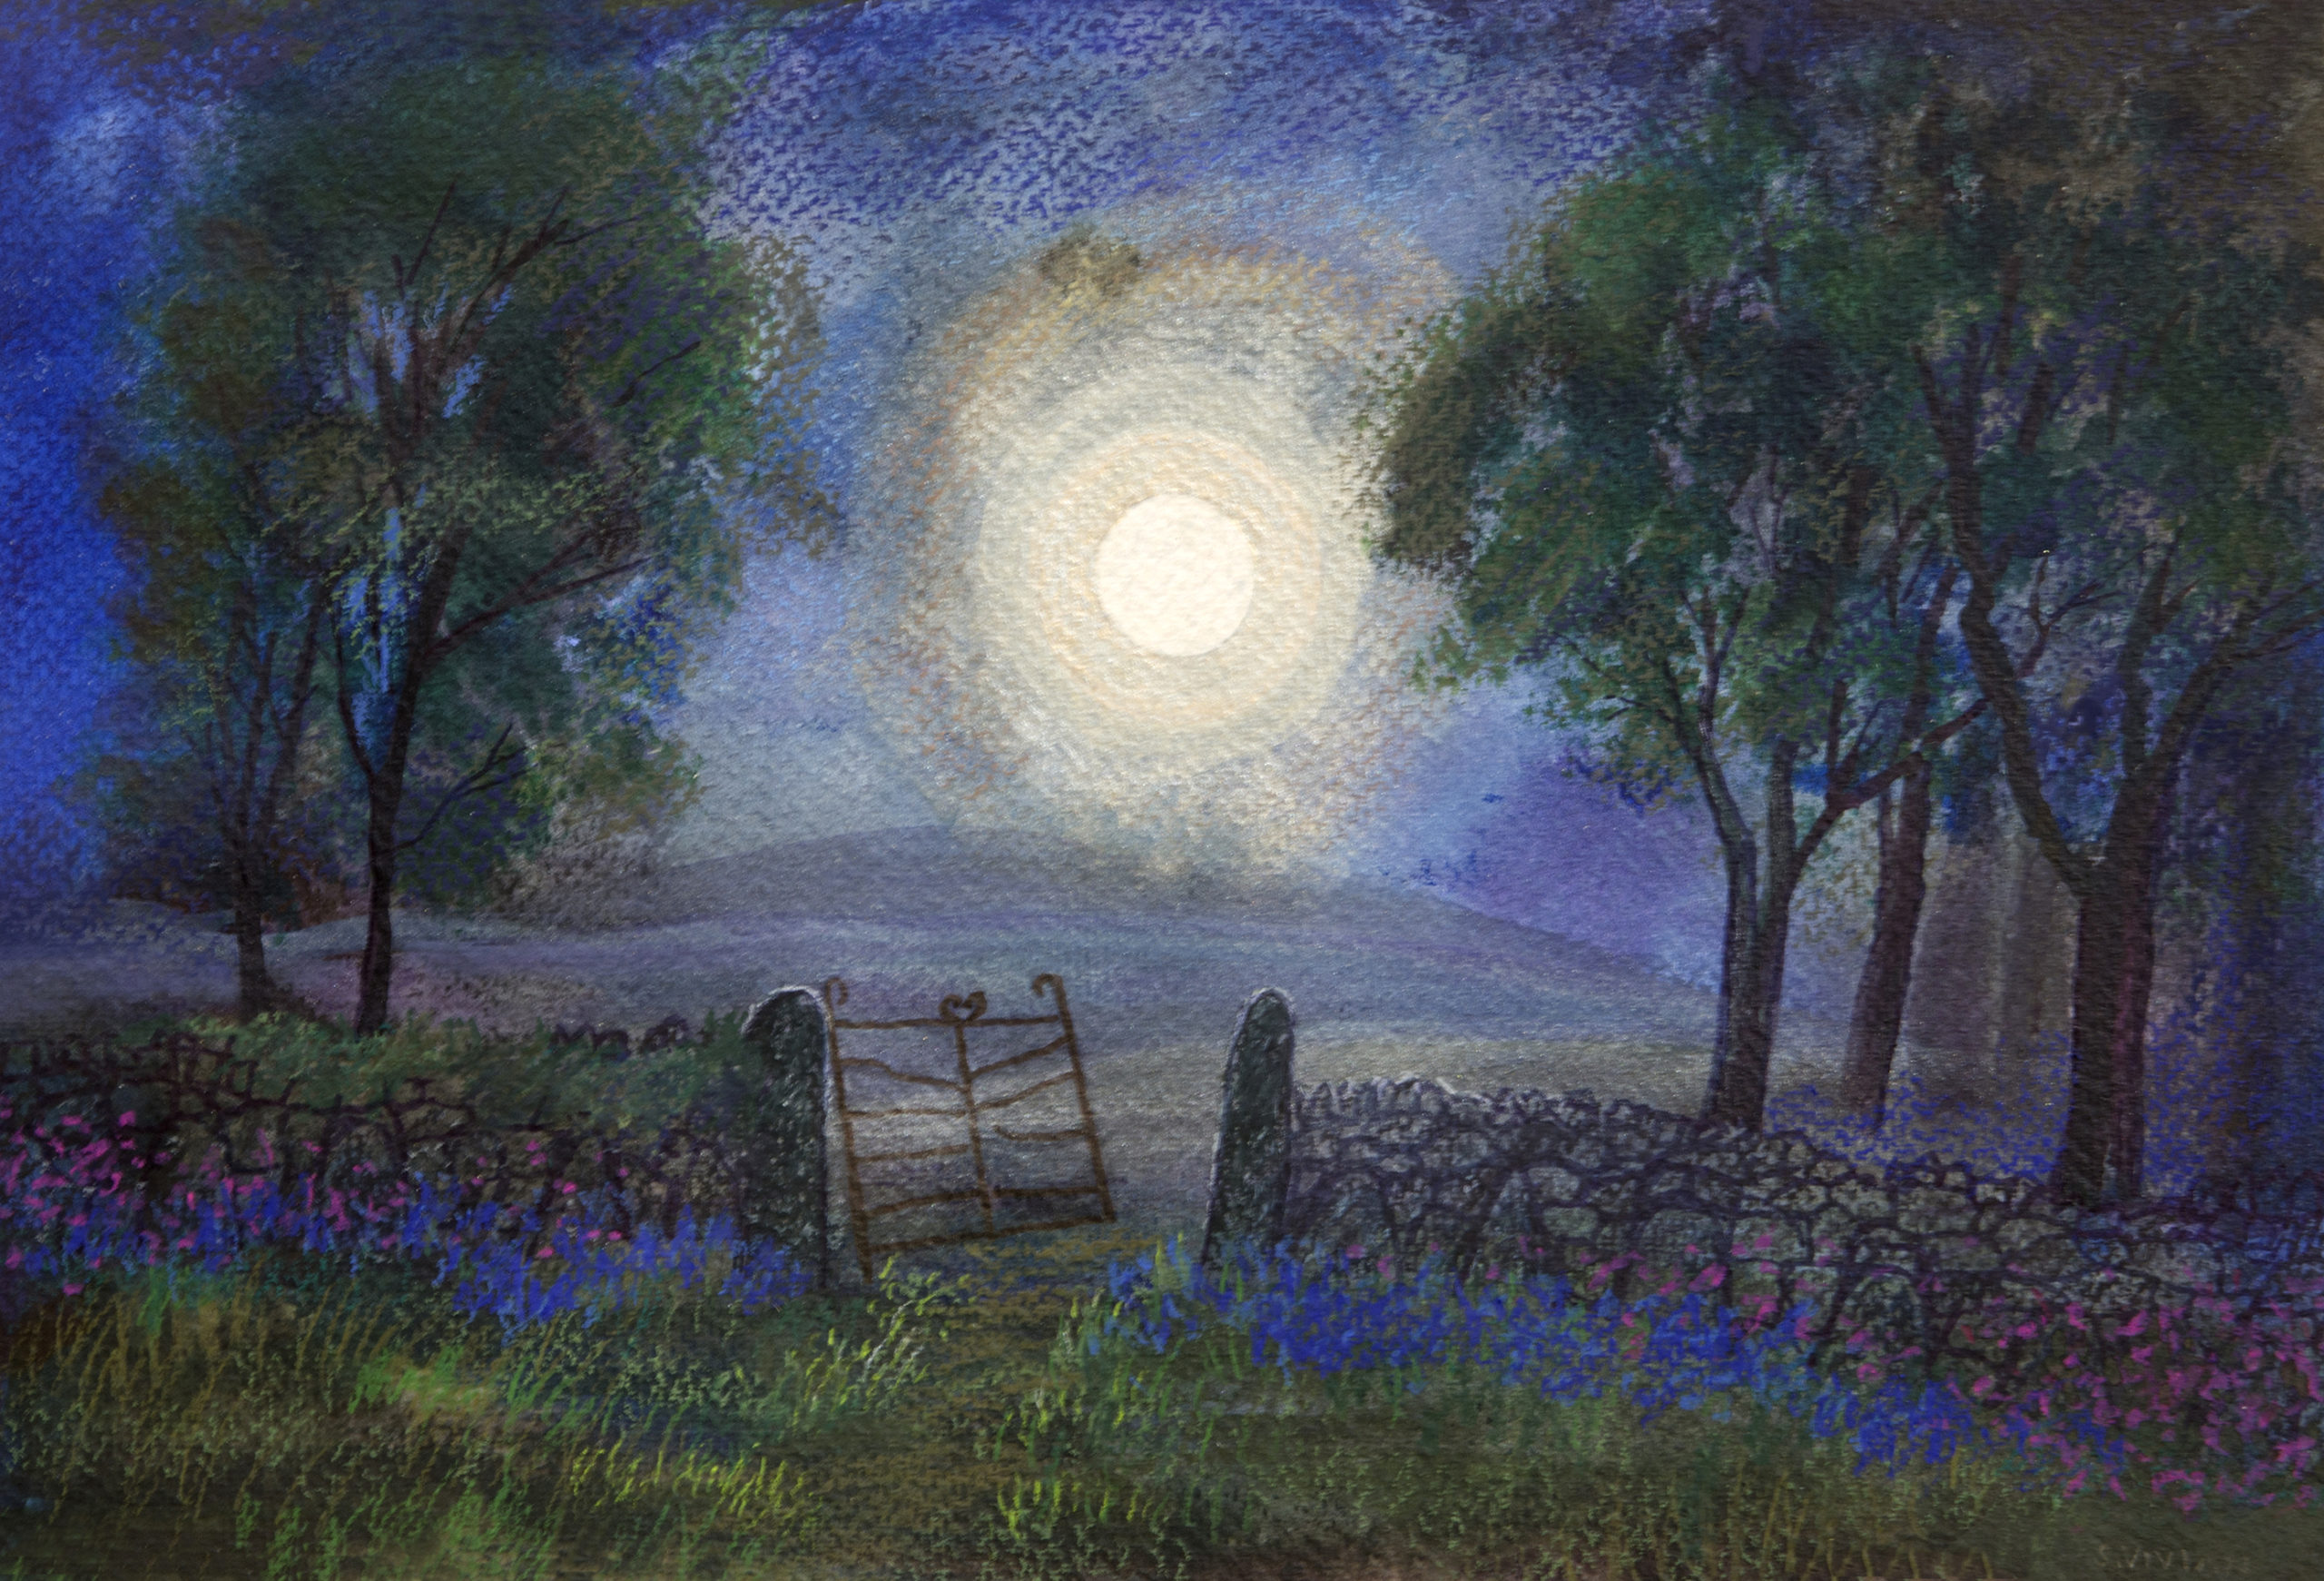 Mixed Media Painting by Sarah Vivian, Gate to the Moor, West Penwith, Cornwall